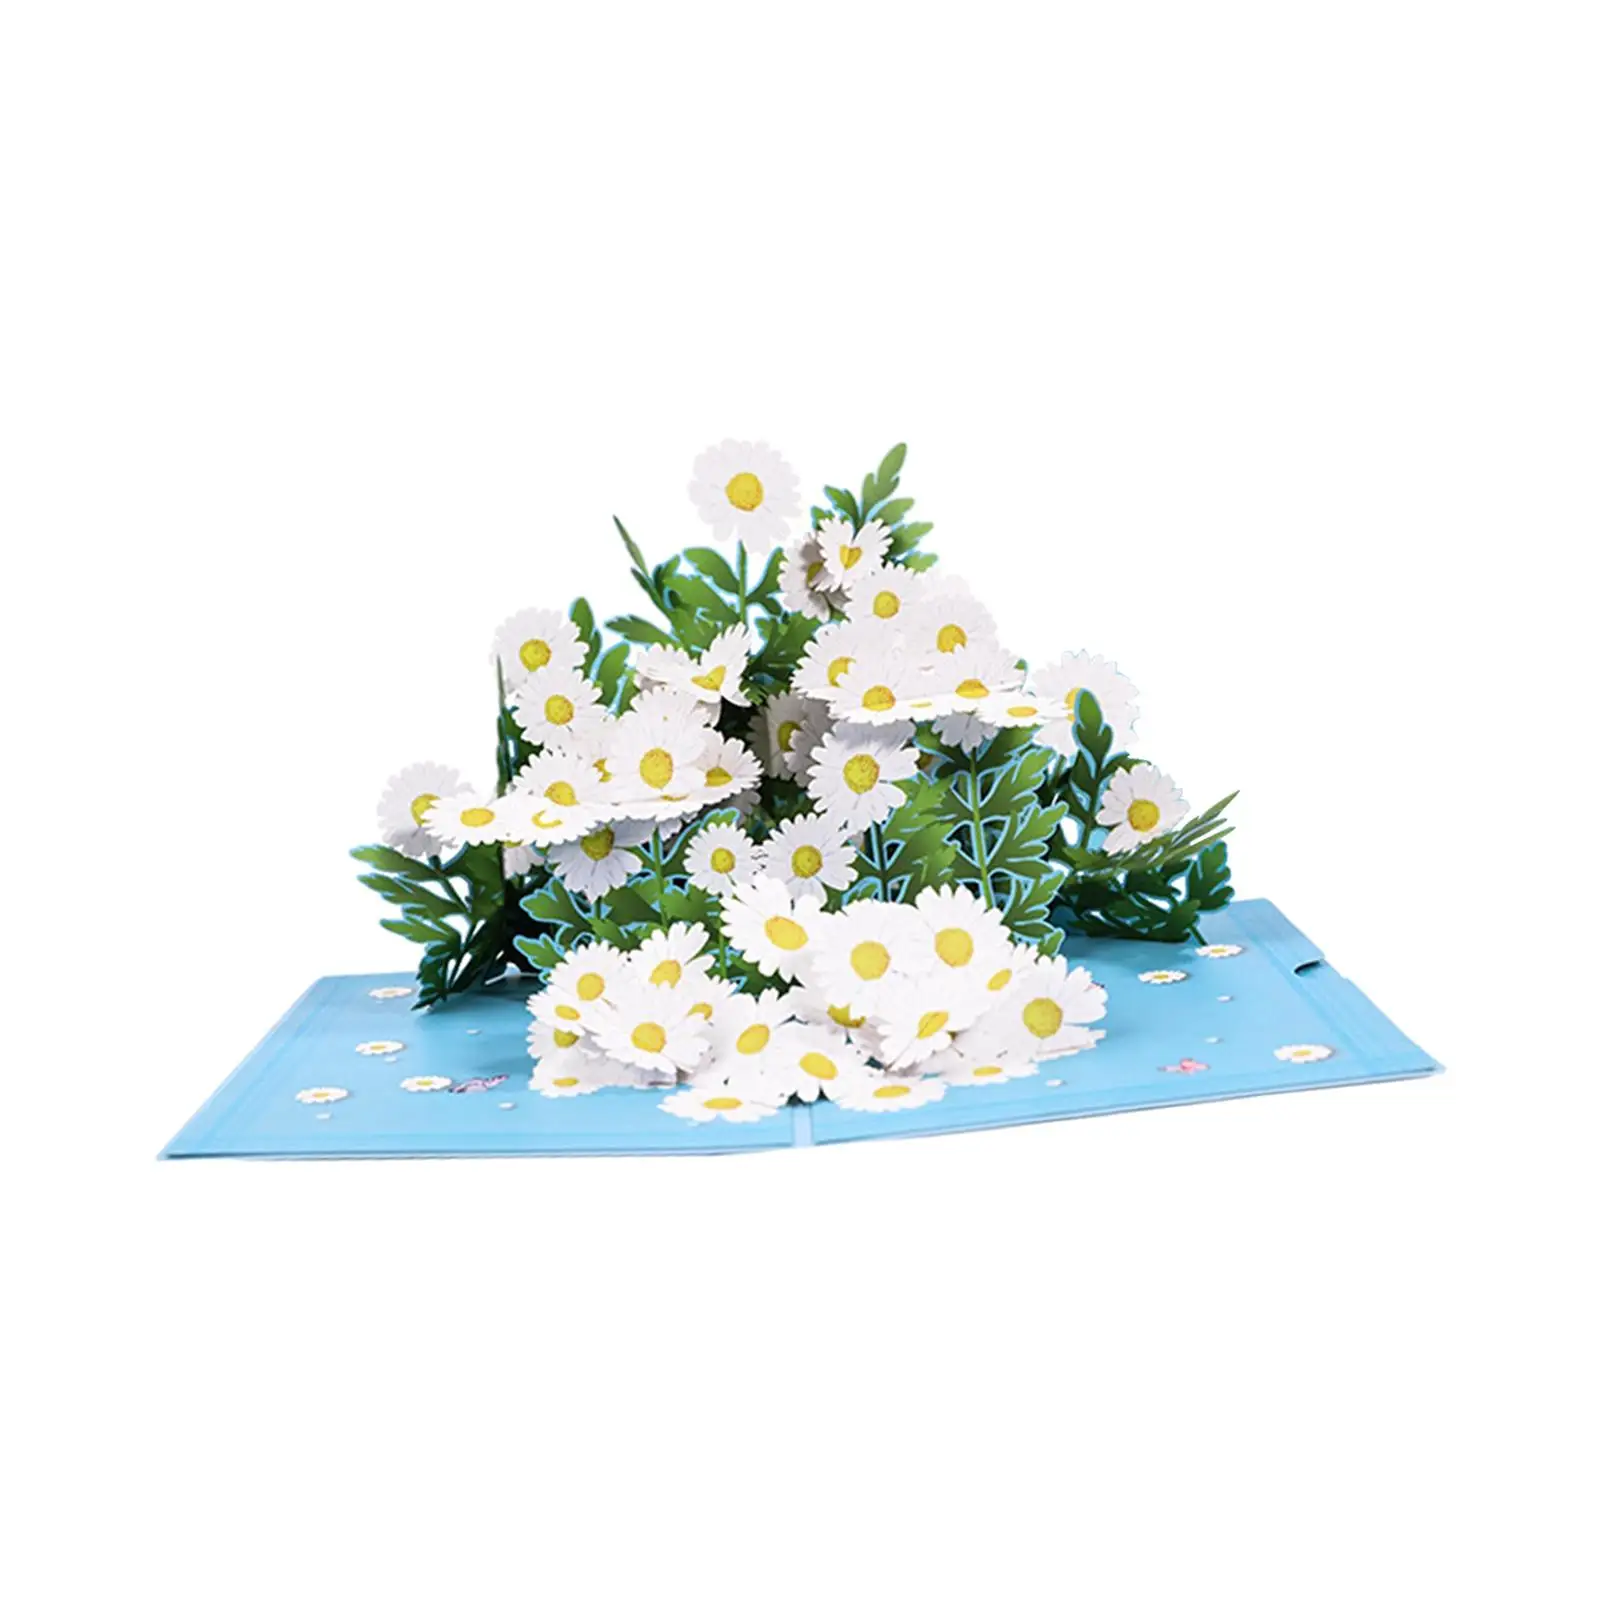 Daisy Bouquet Popup Card Best Wishes Holiday Greeting Card for Anniversary Graduation New Year Classroom Kids School Classroom